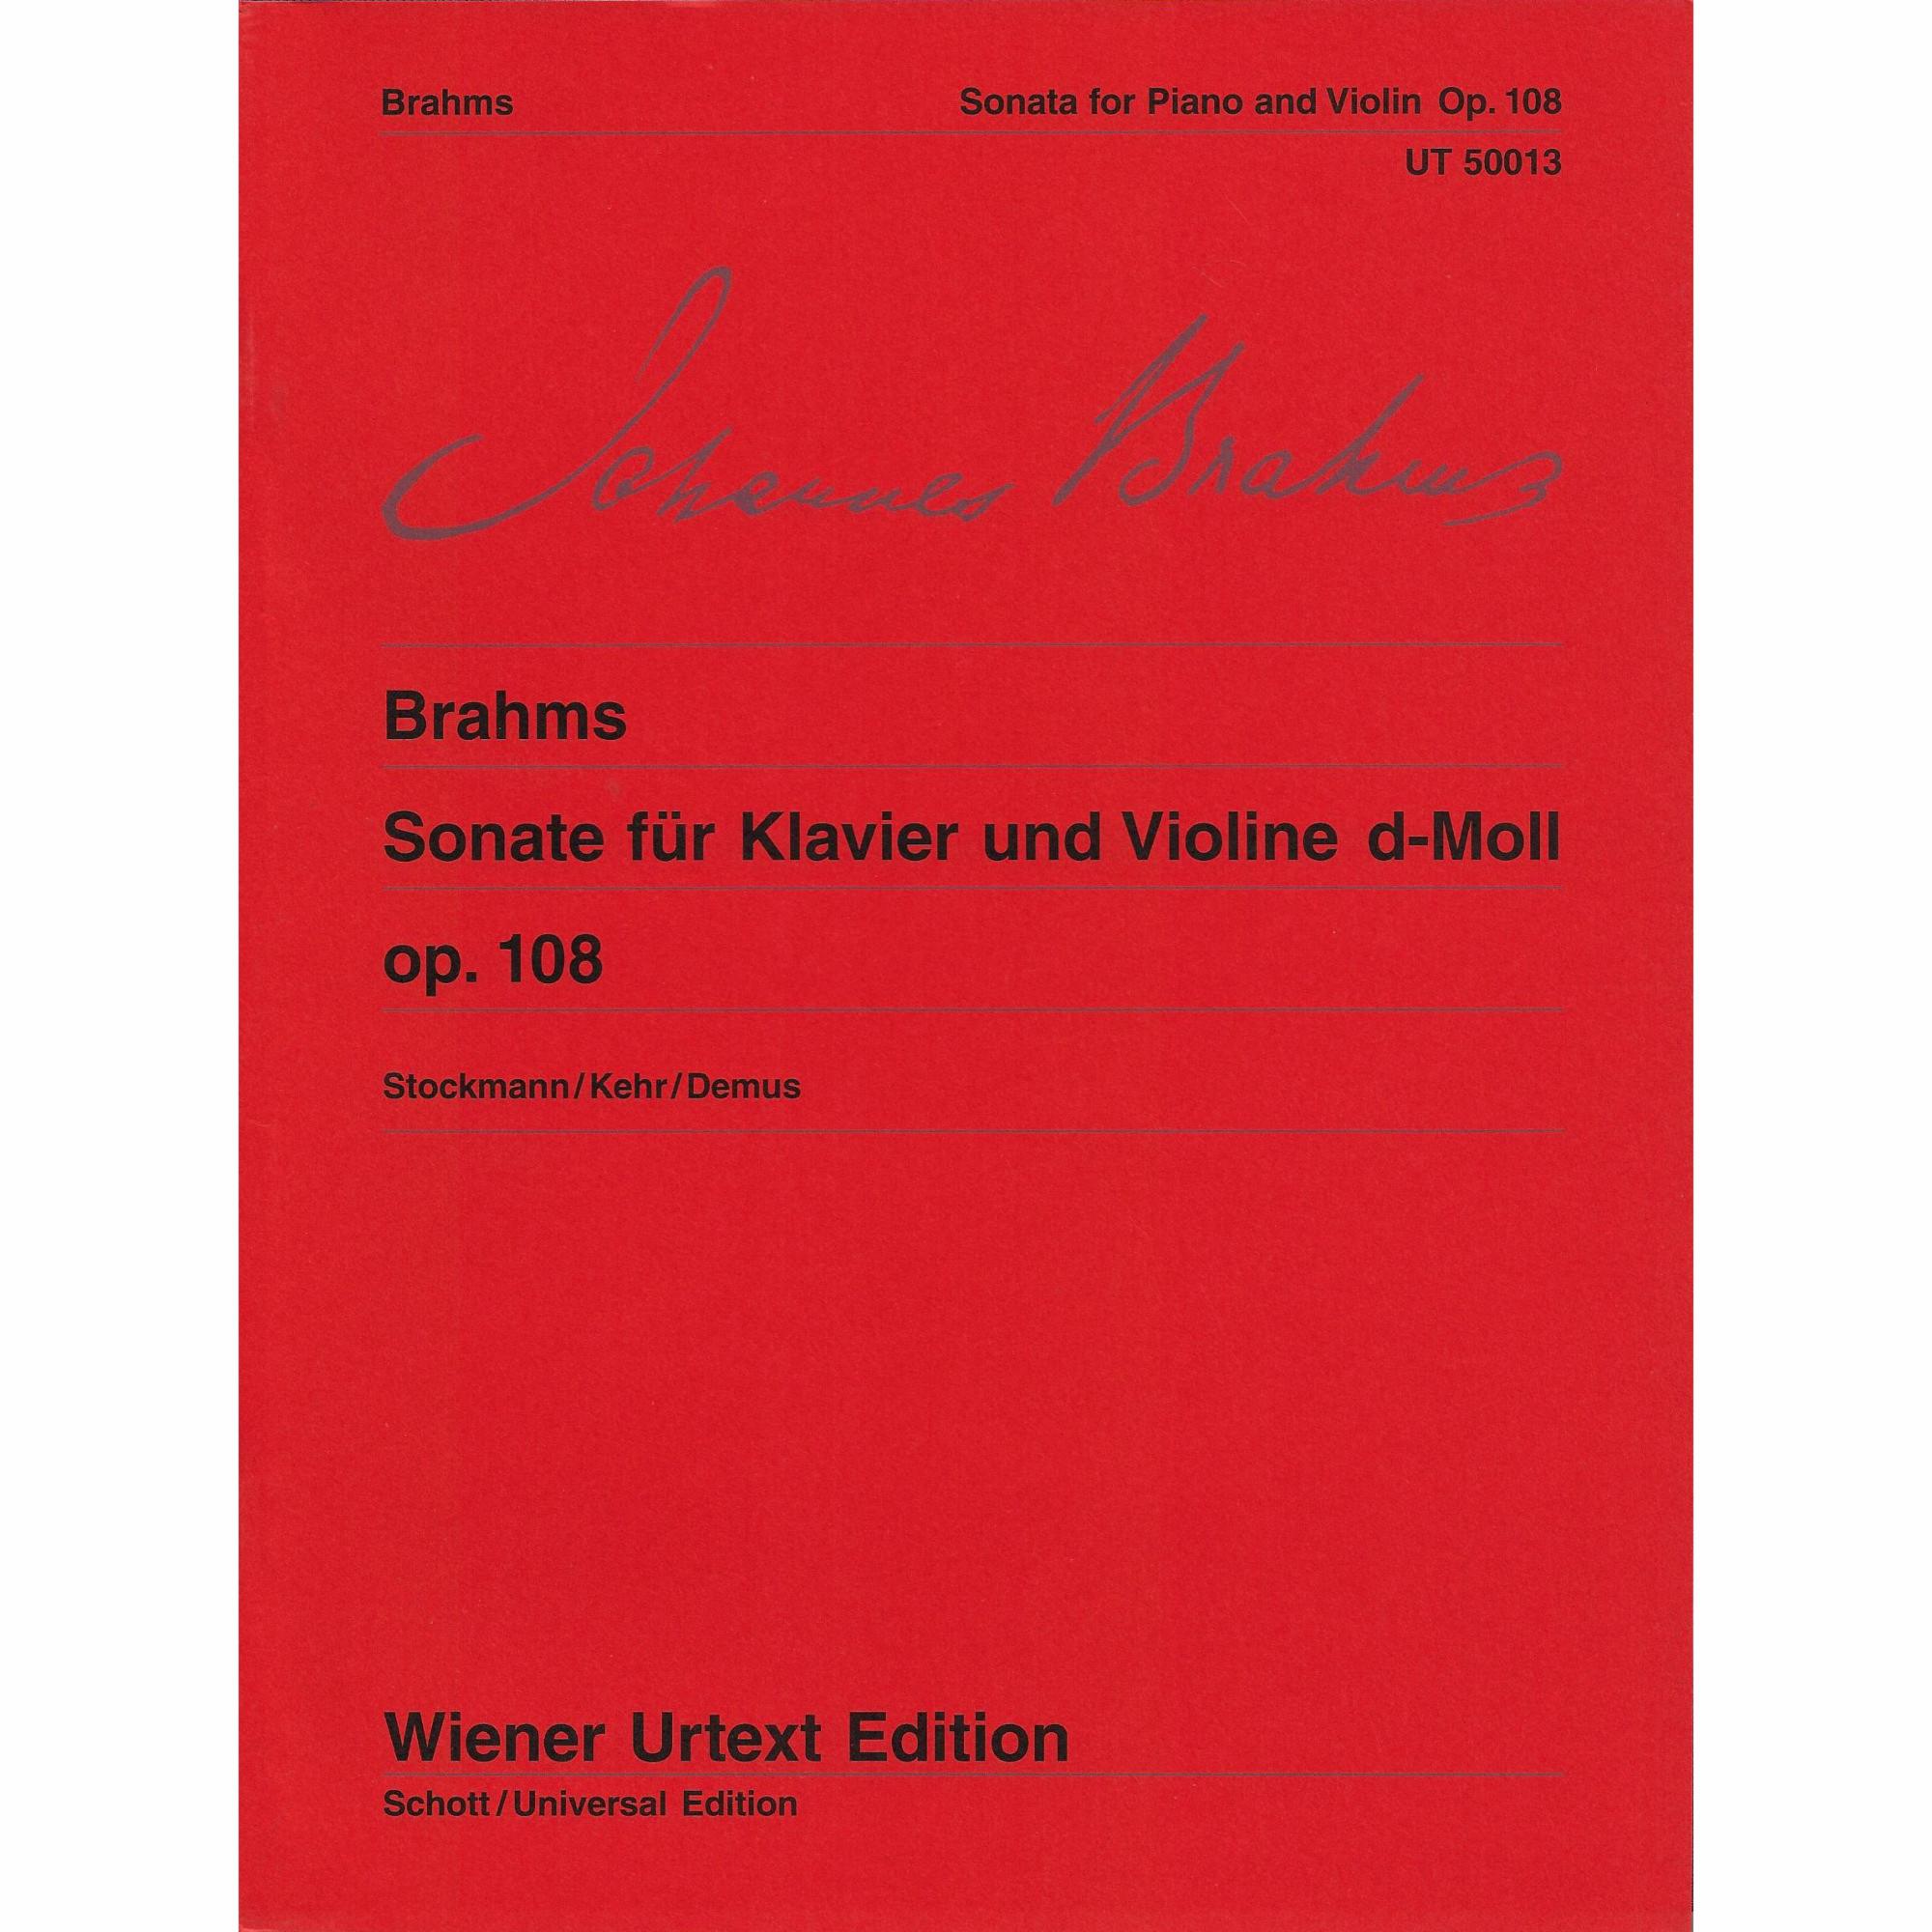 Brahms -- Sonata in D Minor, Op. 108 for Violin and Piano